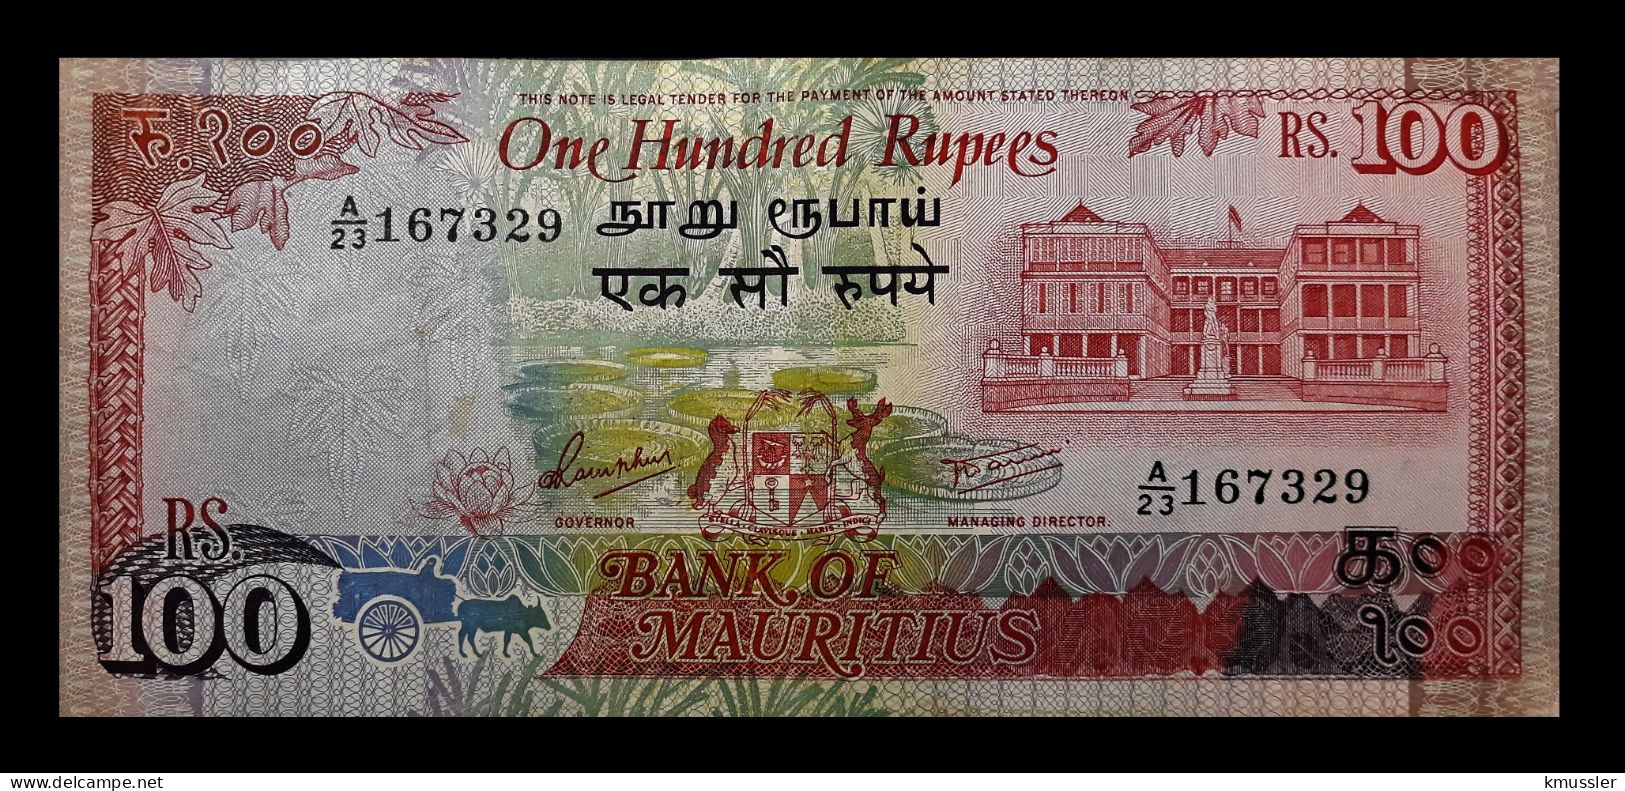 # # # Banknote Mauritius 100 Rupees # # # - Maurice